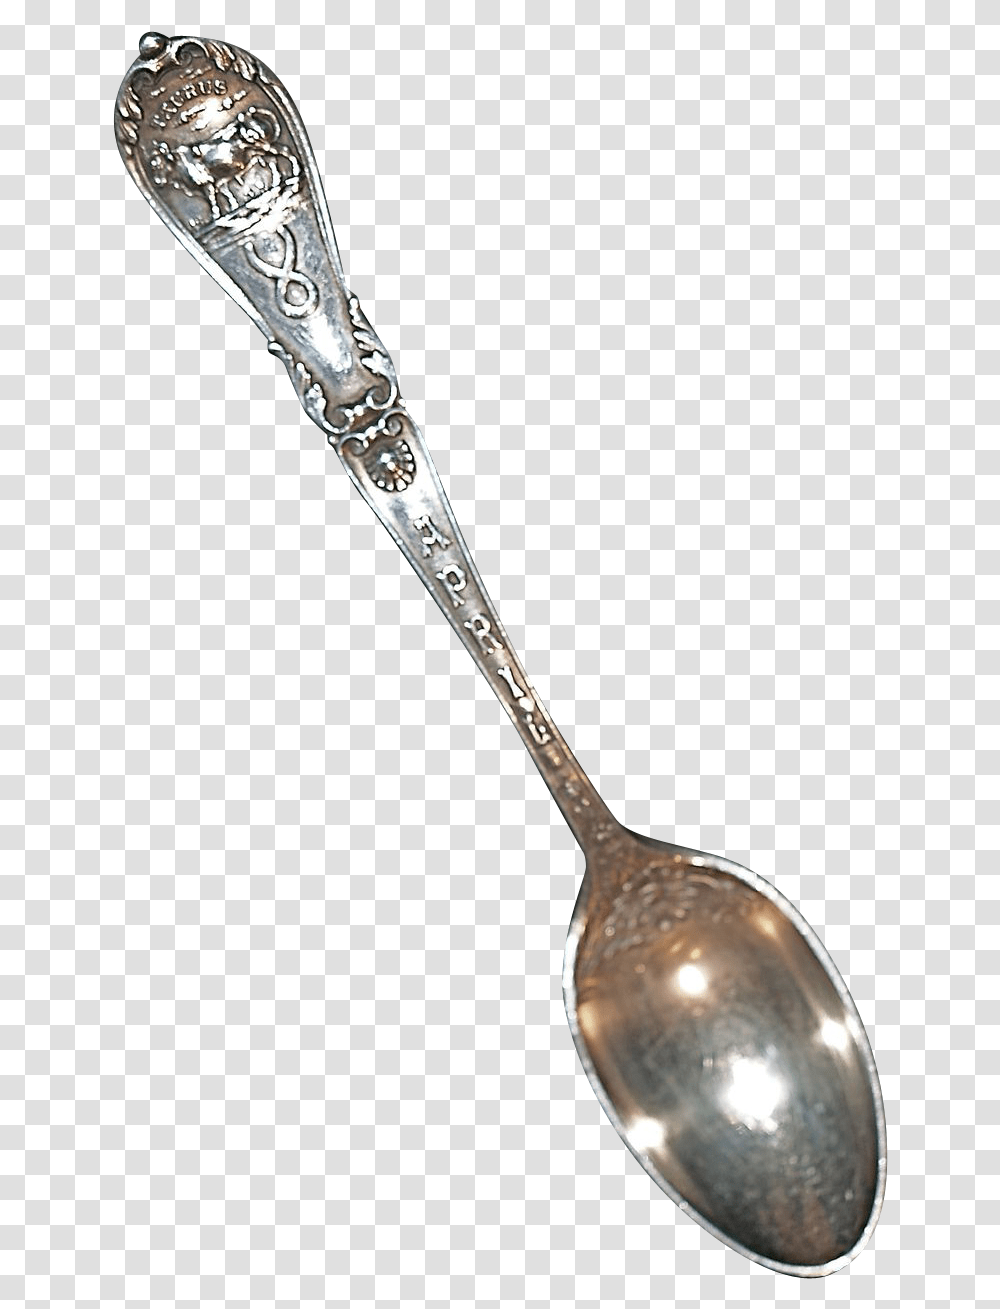 Silver Spoon Download Silver Spoon Background, Cutlery Transparent Png